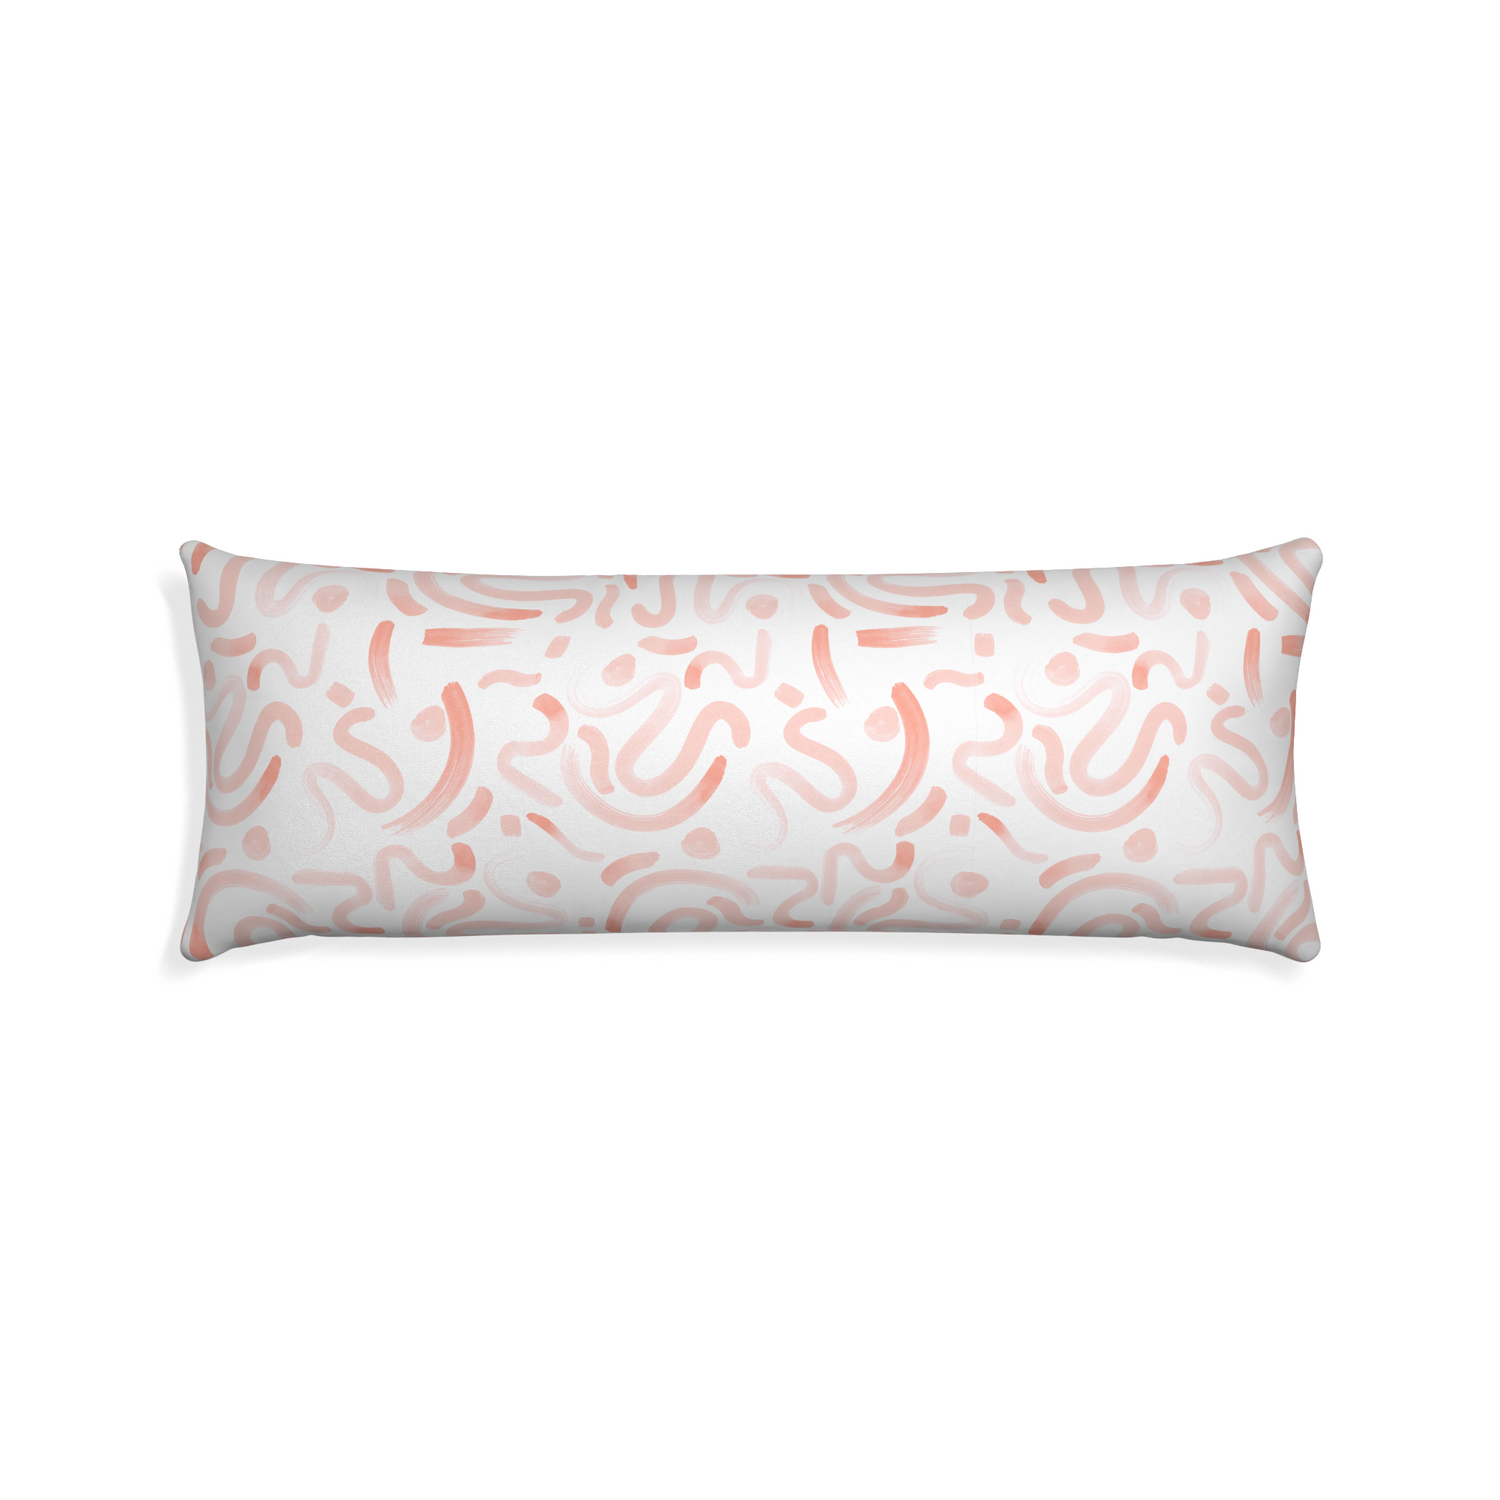 Xl-lumbar hockney pink custom pink graphicpillow with none on white background